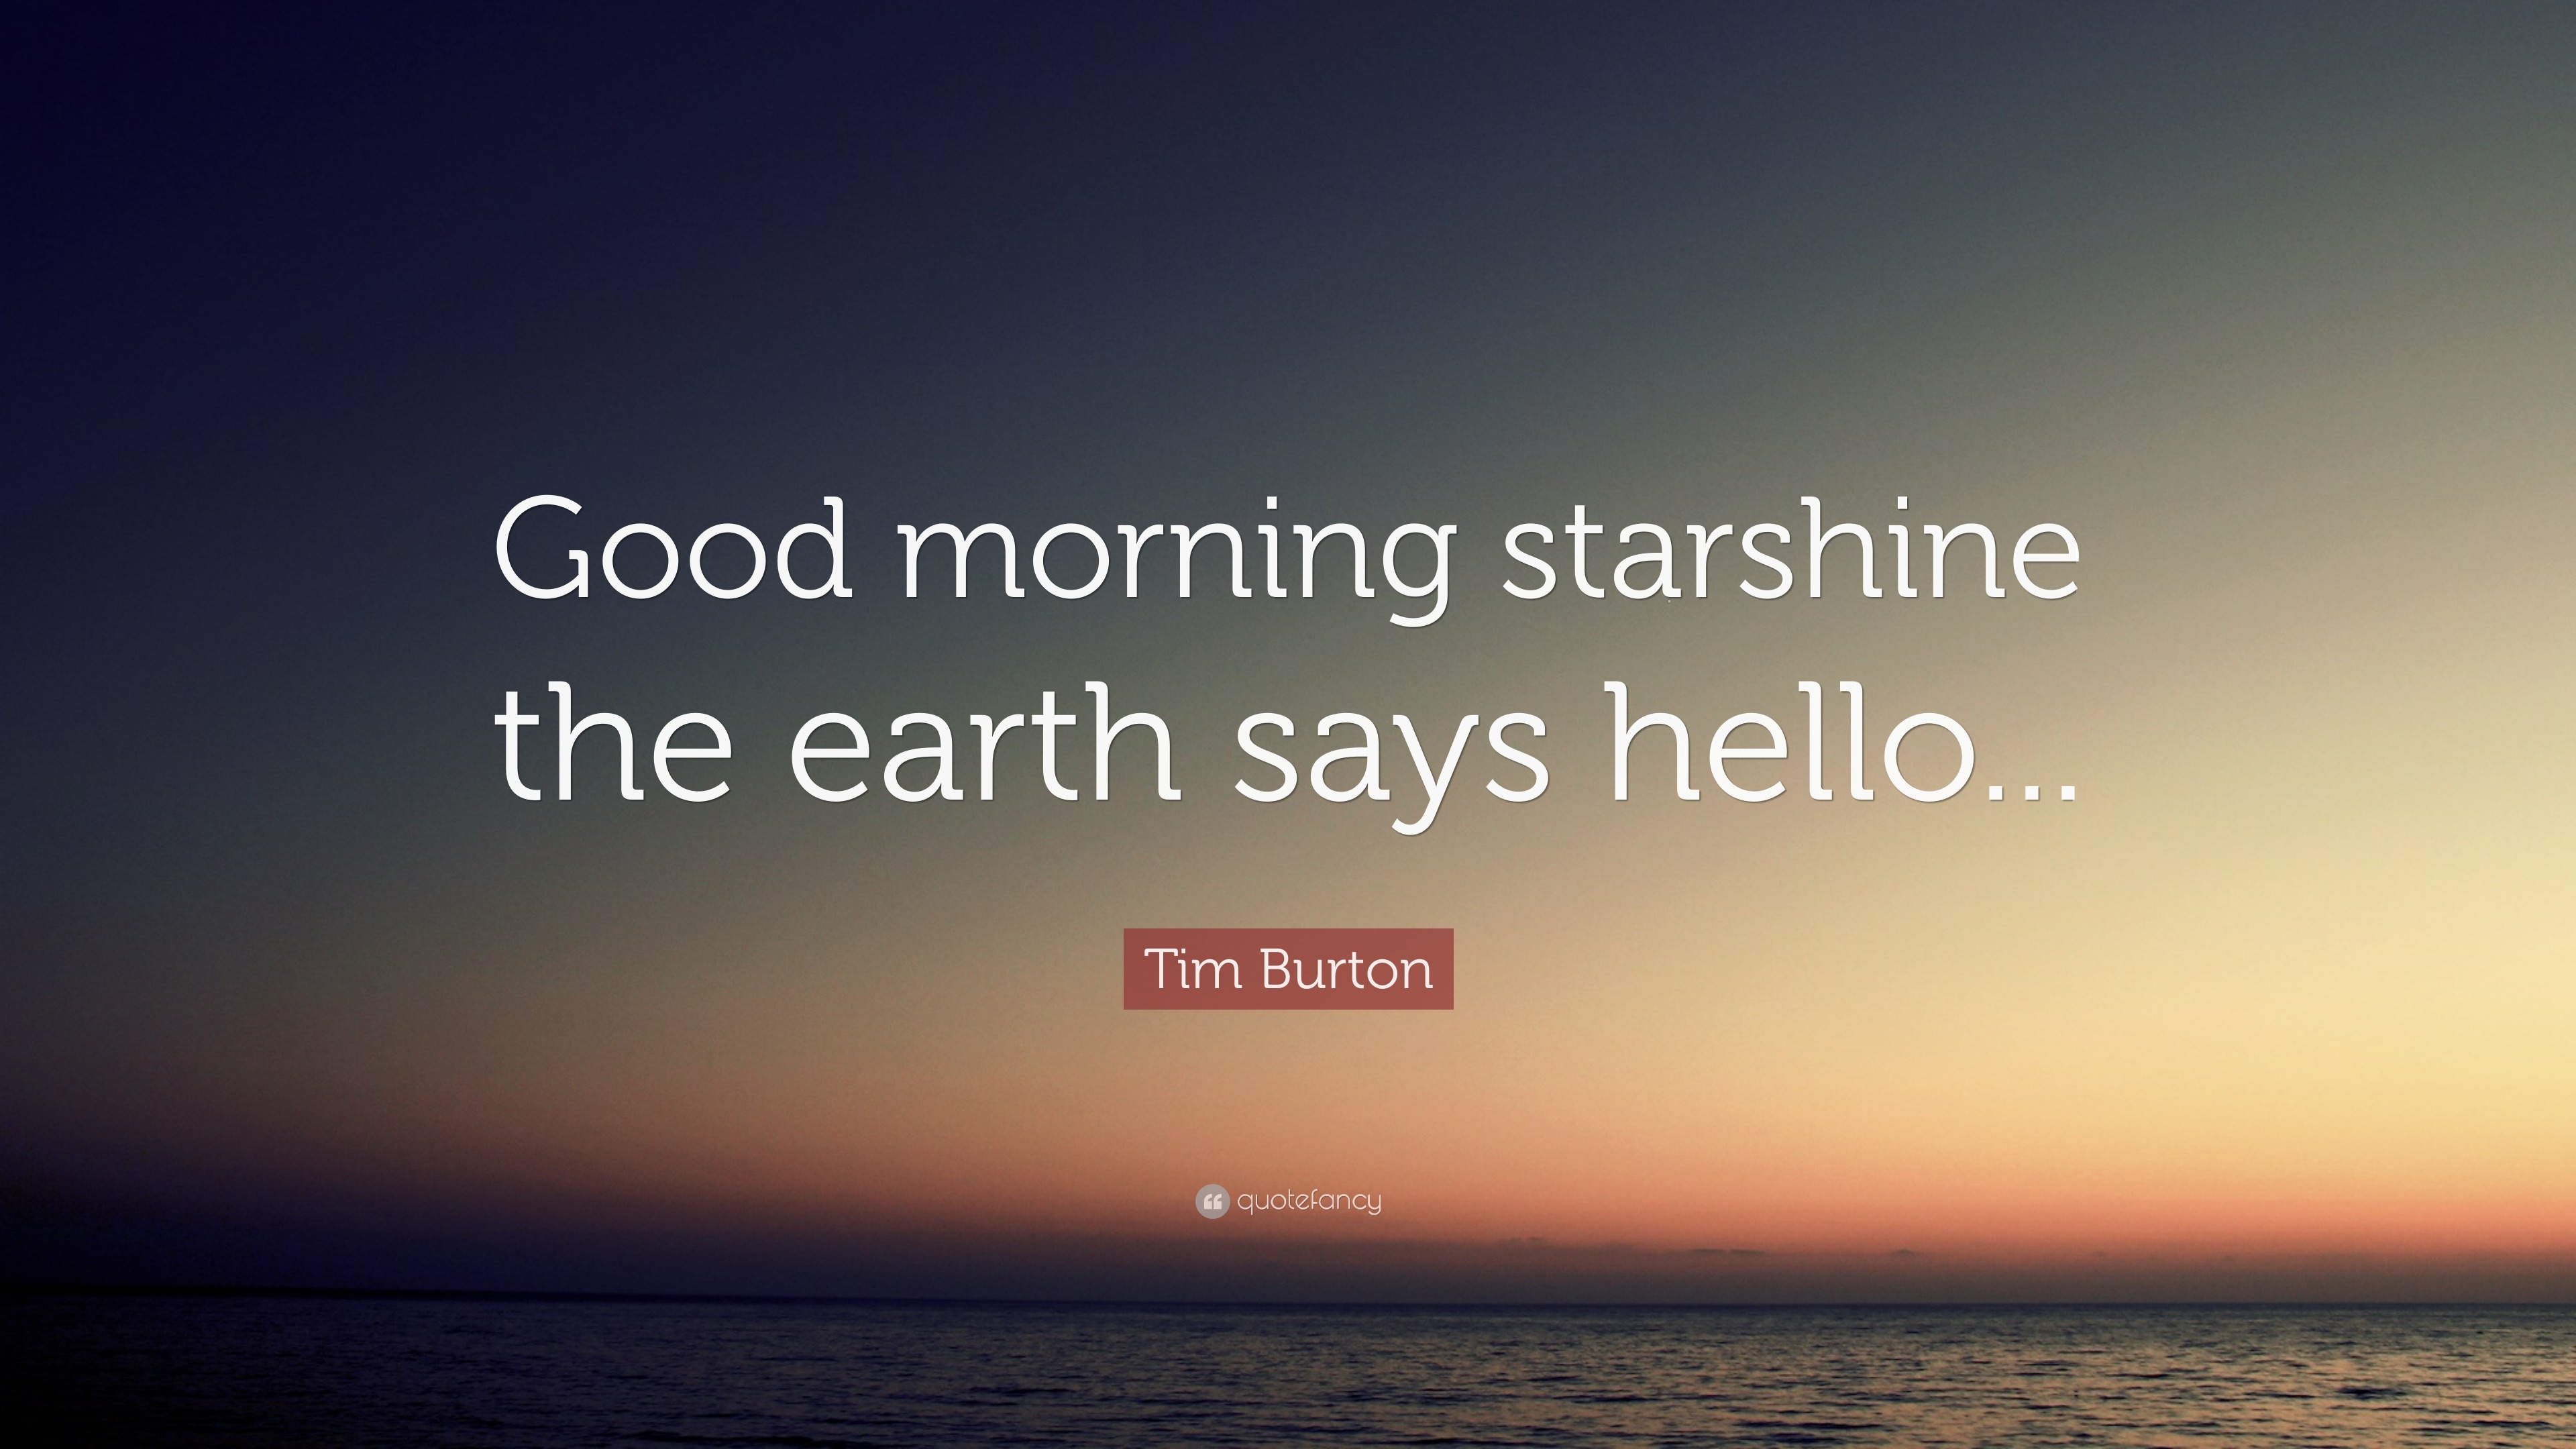 The quote says hello starshine good morning earth GOOD MORNING